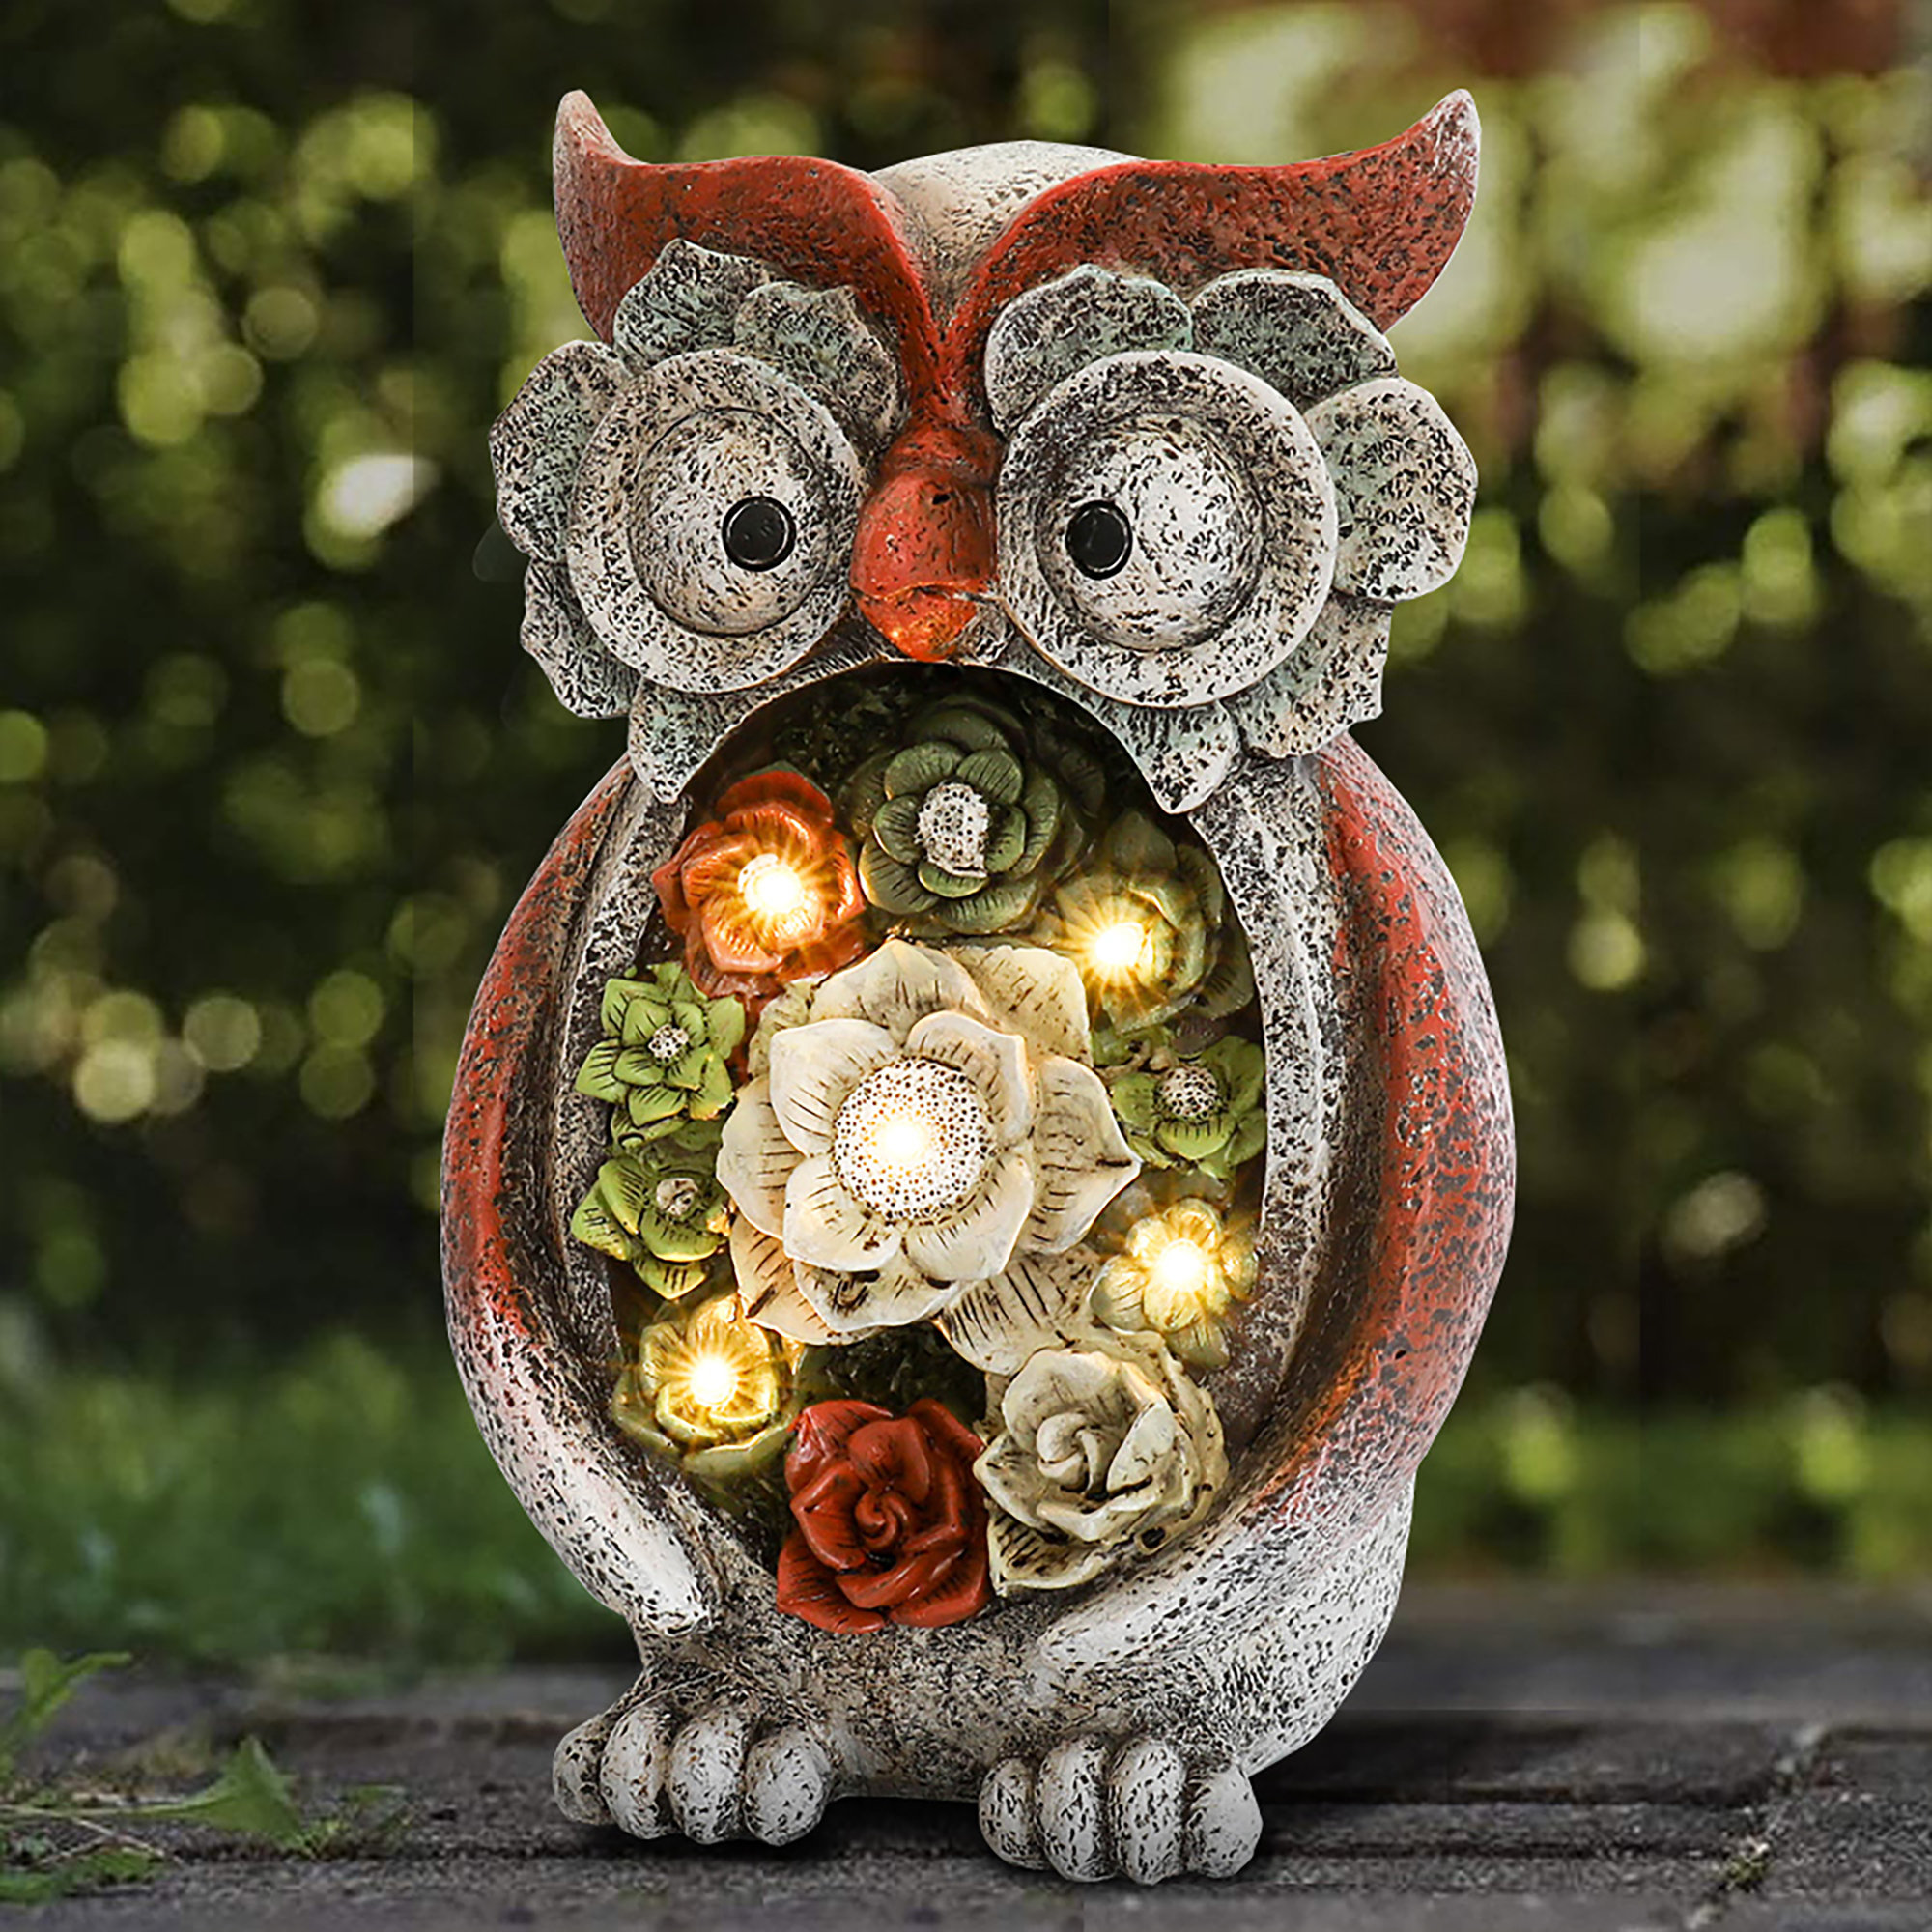 Loon Peak® Owl Garden Statue Solar Powered Resin Animal Figurines With 20  Led Lights For Outdoor Yard Patio Lawn Garden Decorations